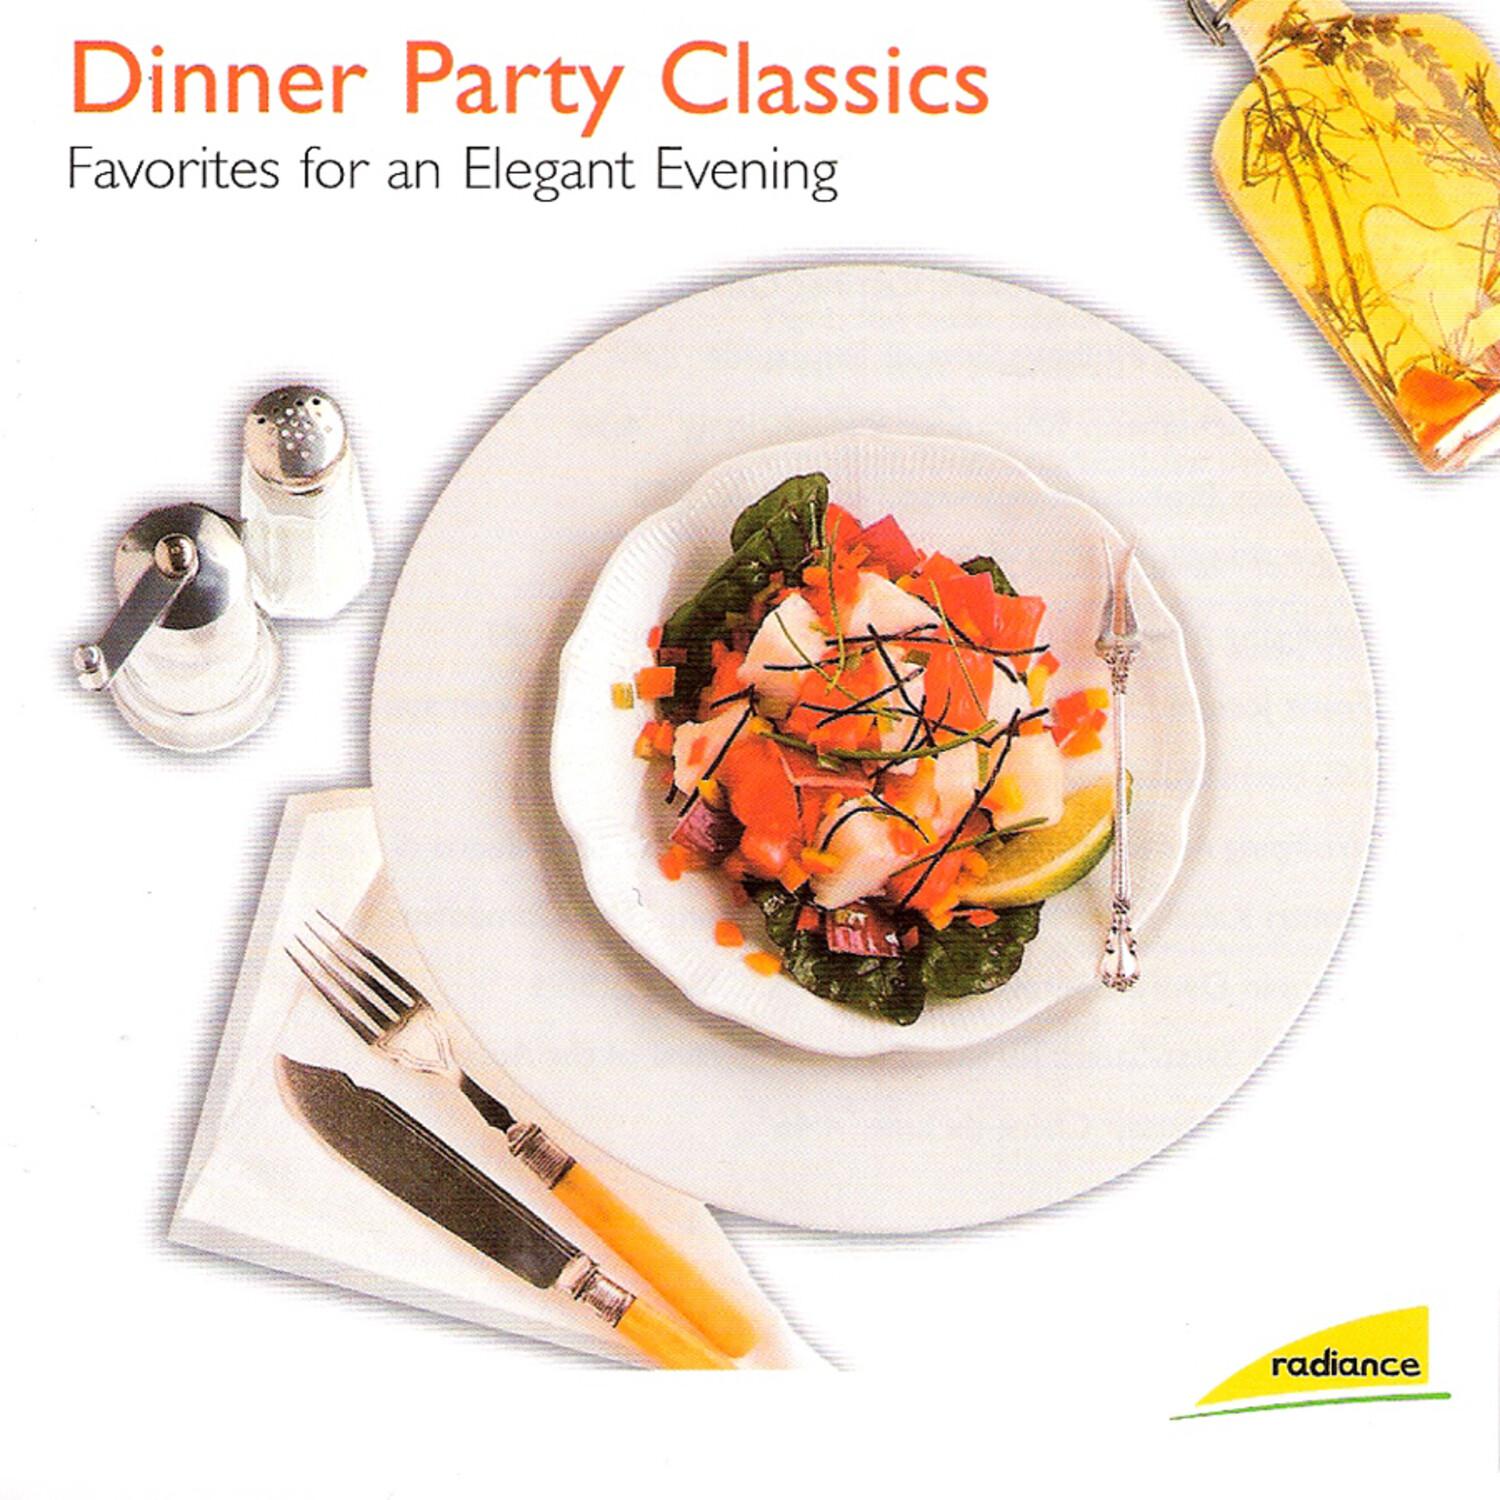 Dinner Party Classics (Favorites for an Elegant Evening)